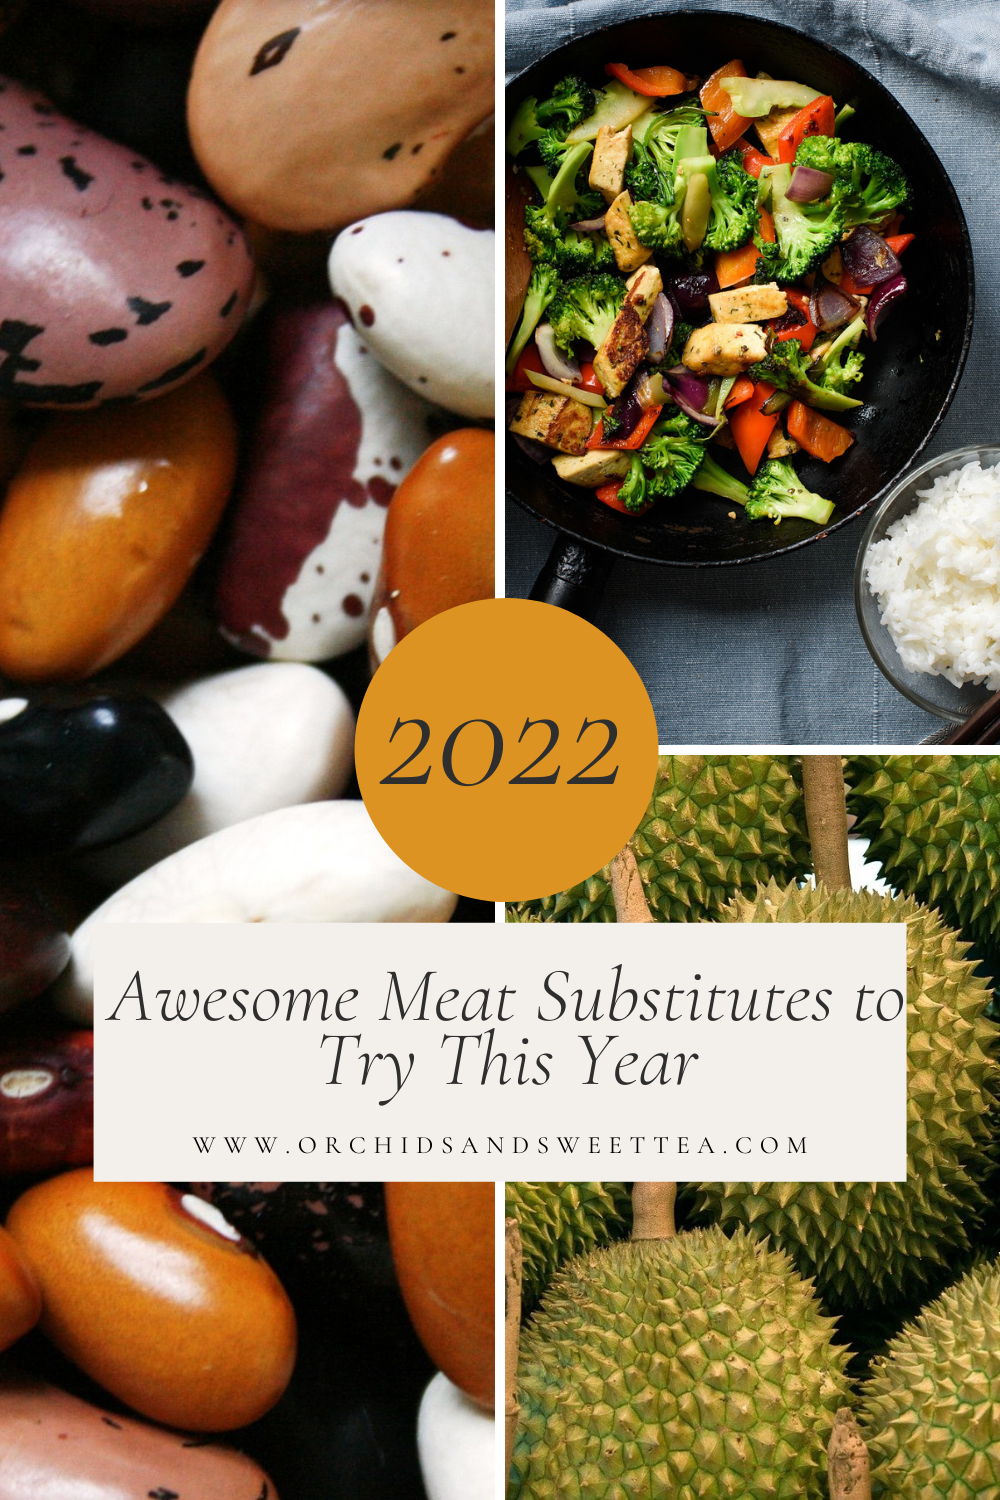 Awesome Meat Substitutes to Try This Year